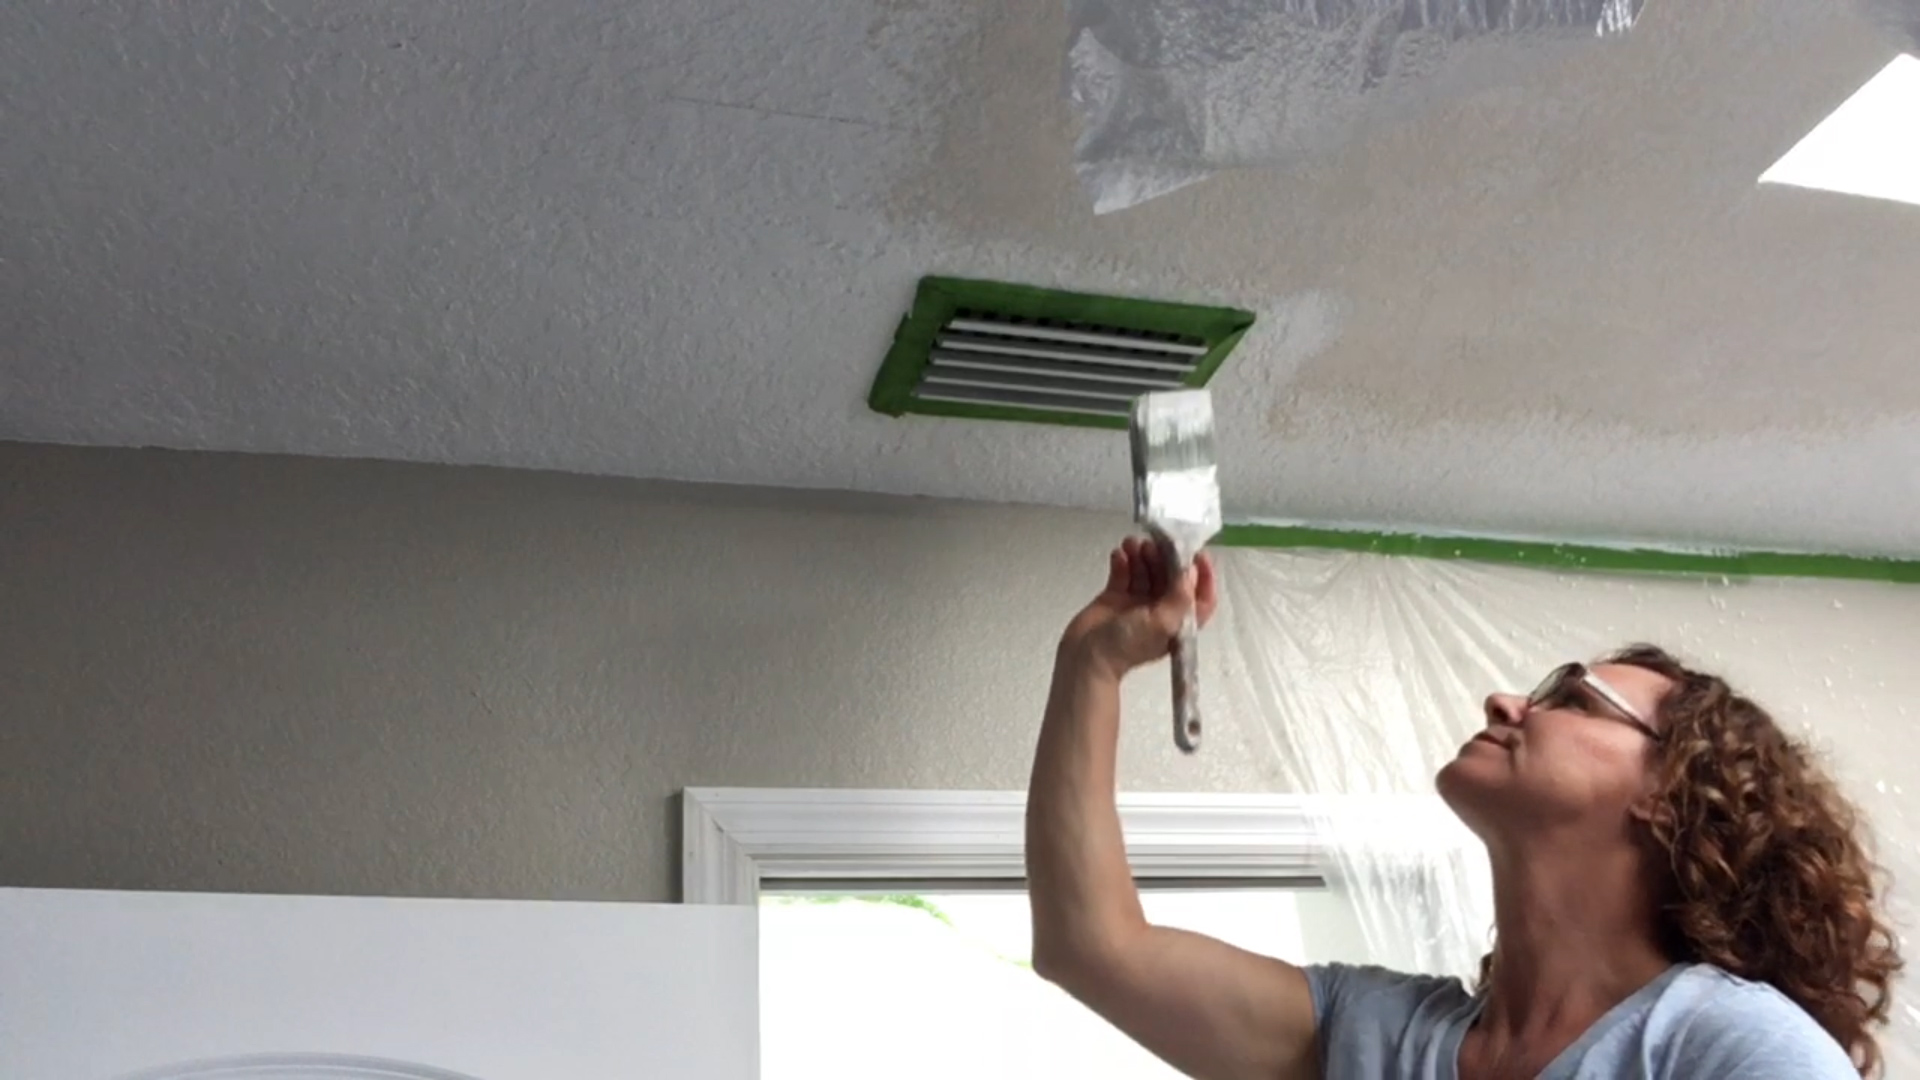 Tutorial and video on how to paint ceilings. Quick read with good tips, tricks and hacks to paint your ceilings and home inside and out. Links to several other good painting tutorials and excellent time saving products to use when painting your ceilings or other DIY home improvement painting projects.